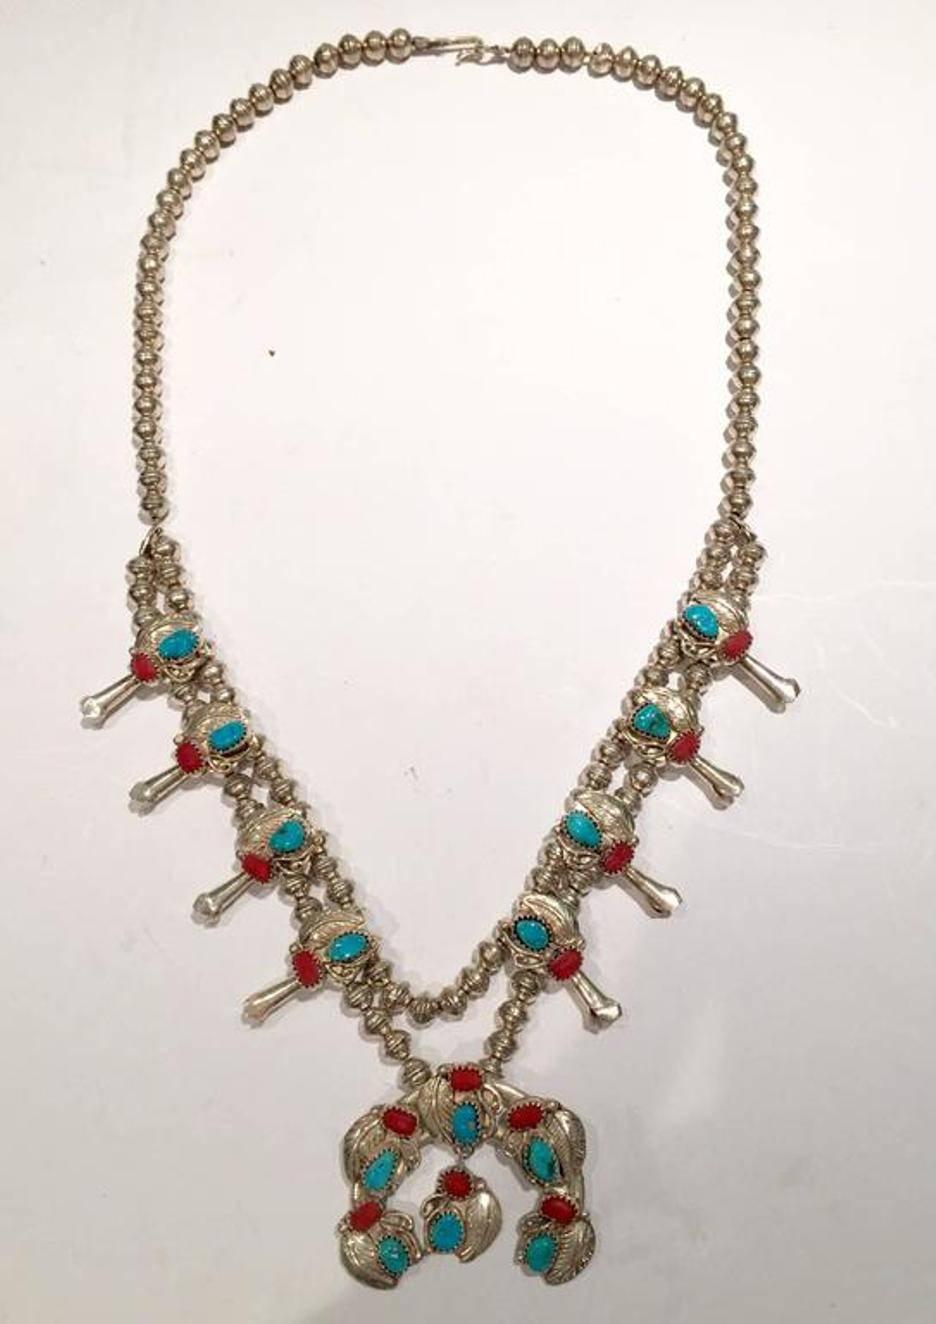 Vintage Native American-style double-sterling silver bead, turquoise, and coral squash blossom necklace. This piece is set with a total of 28 semi-precious stones: 14 turquoise and 14 coral. Each stone is approximately .25"Dia. Each sterling